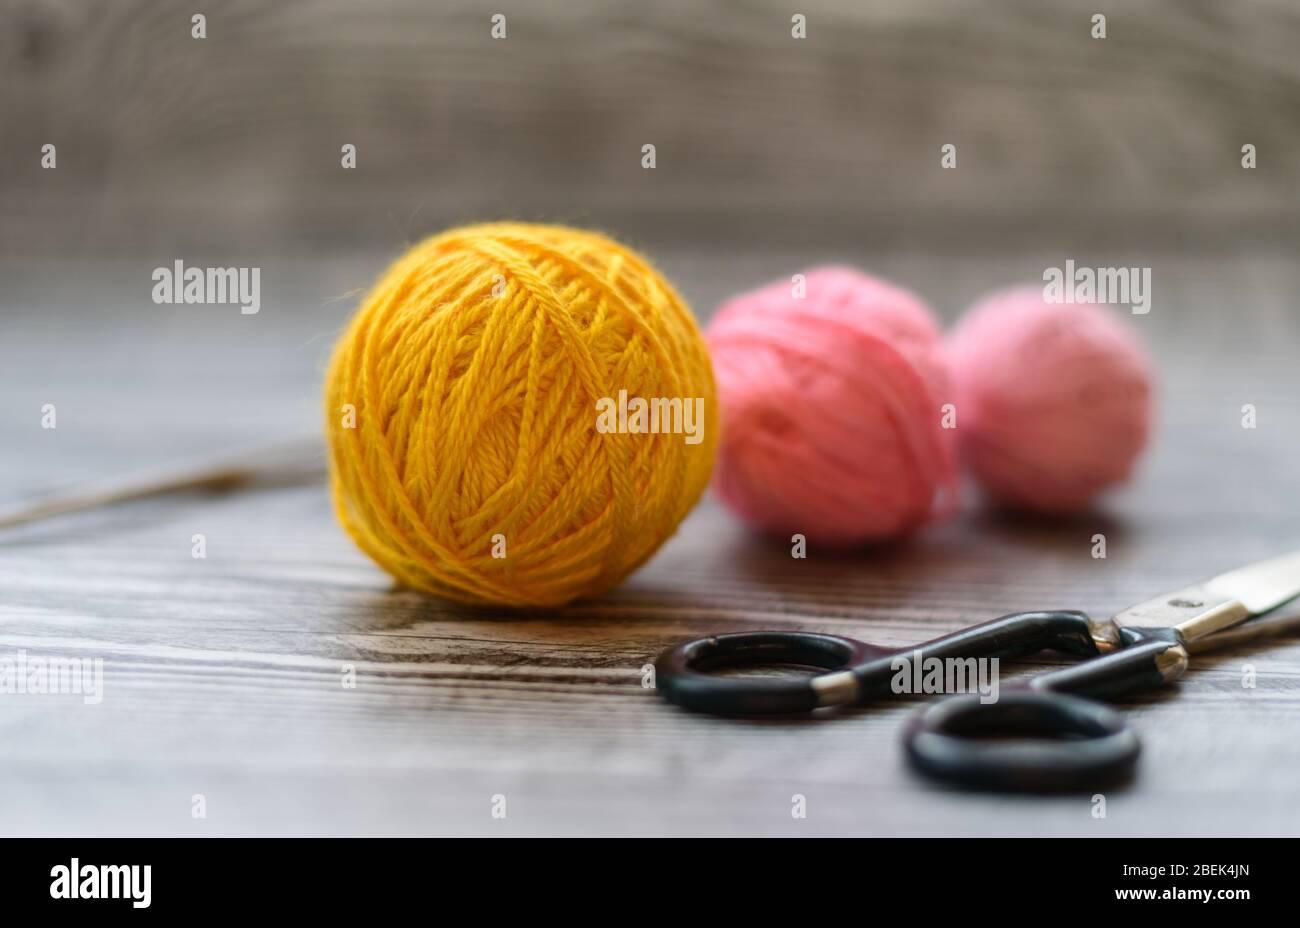 Flat lay of three colored wool balls, knitting needles and scissors laying on the wooden background. Stock Photo